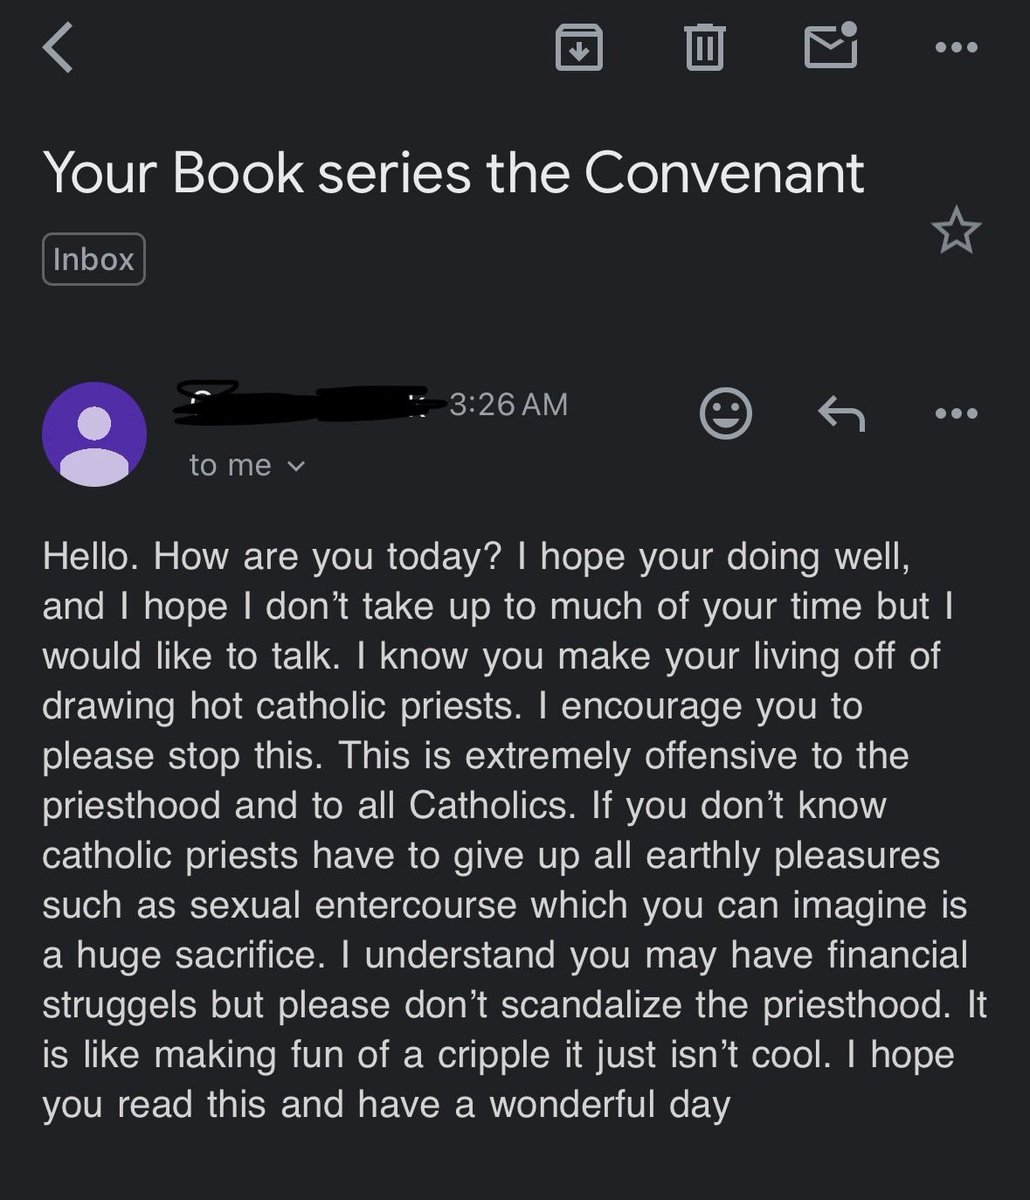 you’re right I only sexualize priests because I have financial struggles! if you buy 50,000 copies of my graphic novel I will stop!